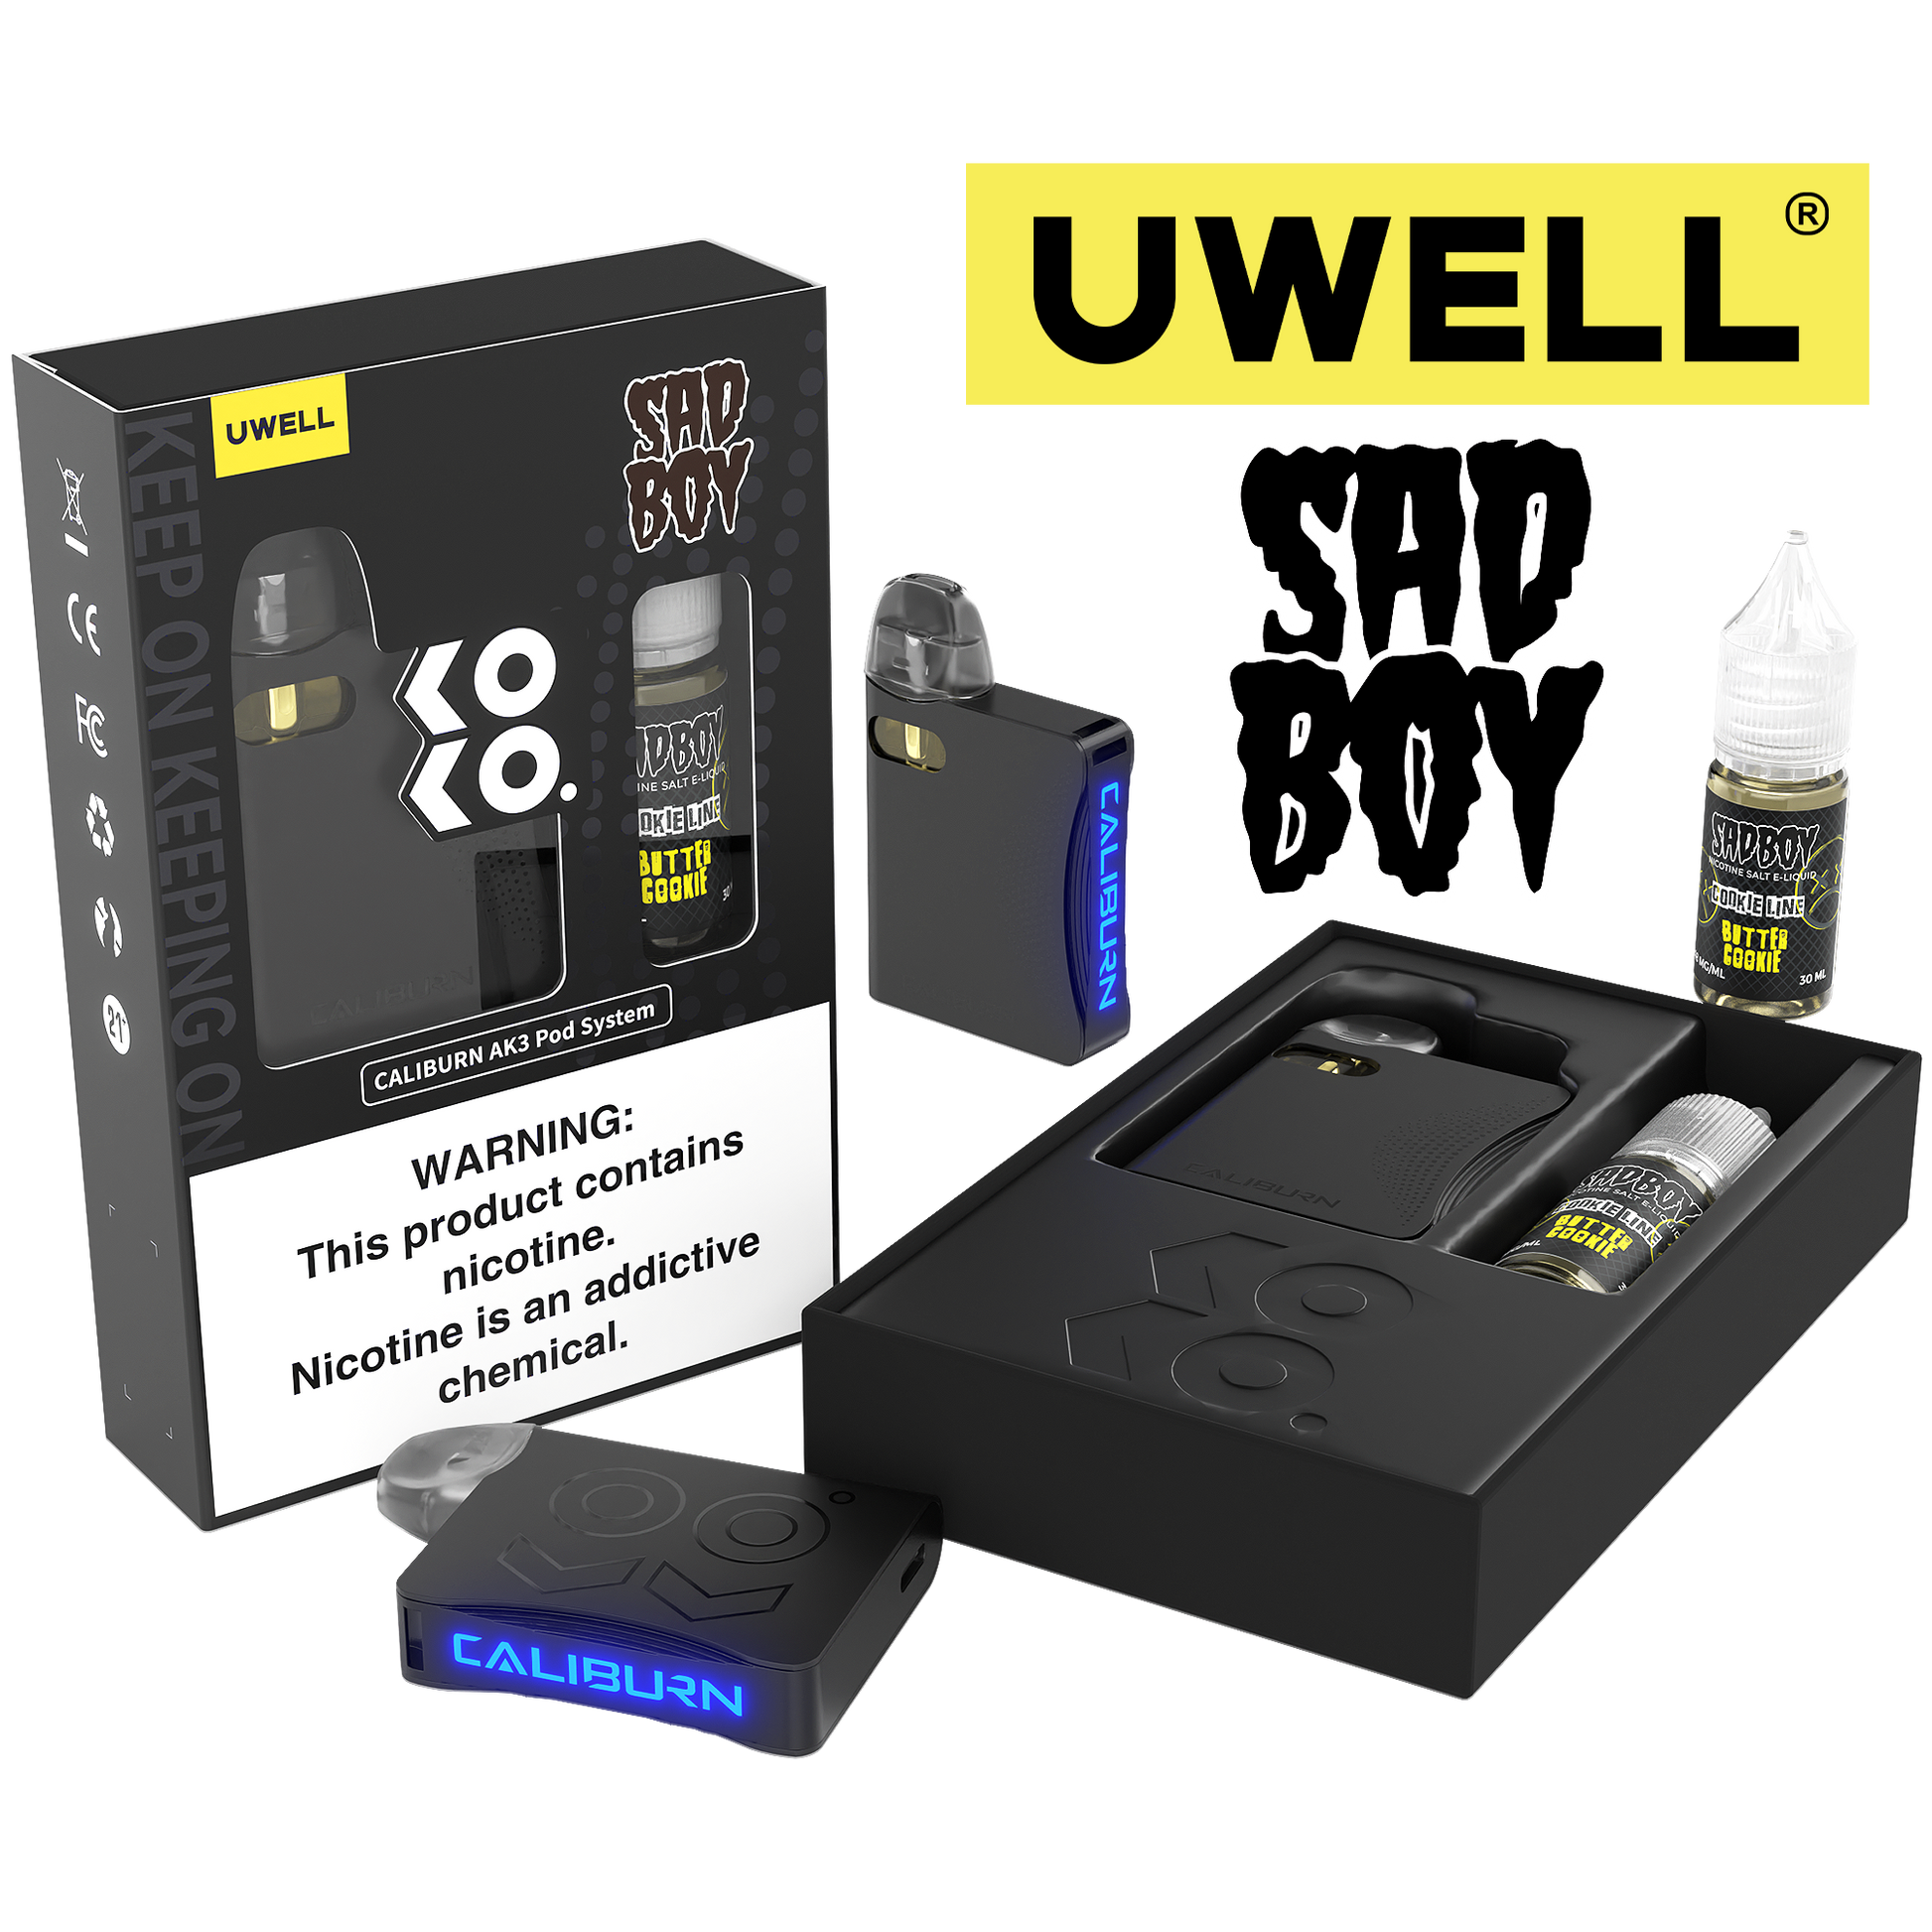 Uwell Caliburn AK3 Kit + A3S 0.8ohm Pods (x2) + Daddy's Vapor 10mL Salts 50mg Black Flavor: Butter Cookie Packaging